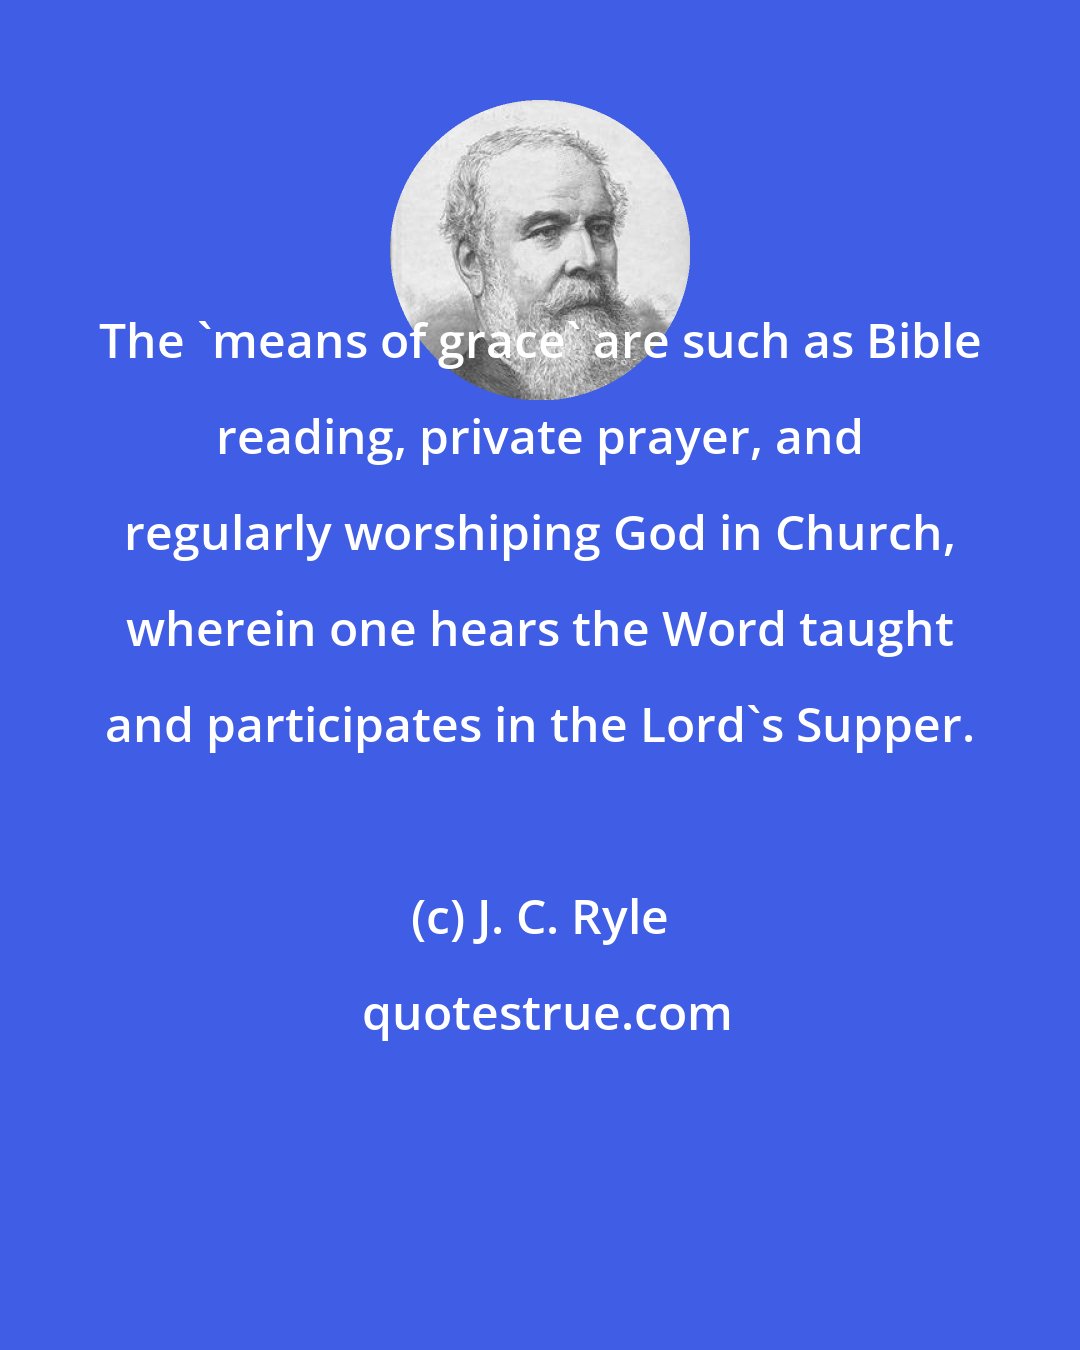 J. C. Ryle: The 'means of grace' are such as Bible reading, private prayer, and regularly worshiping God in Church, wherein one hears the Word taught and participates in the Lord's Supper.